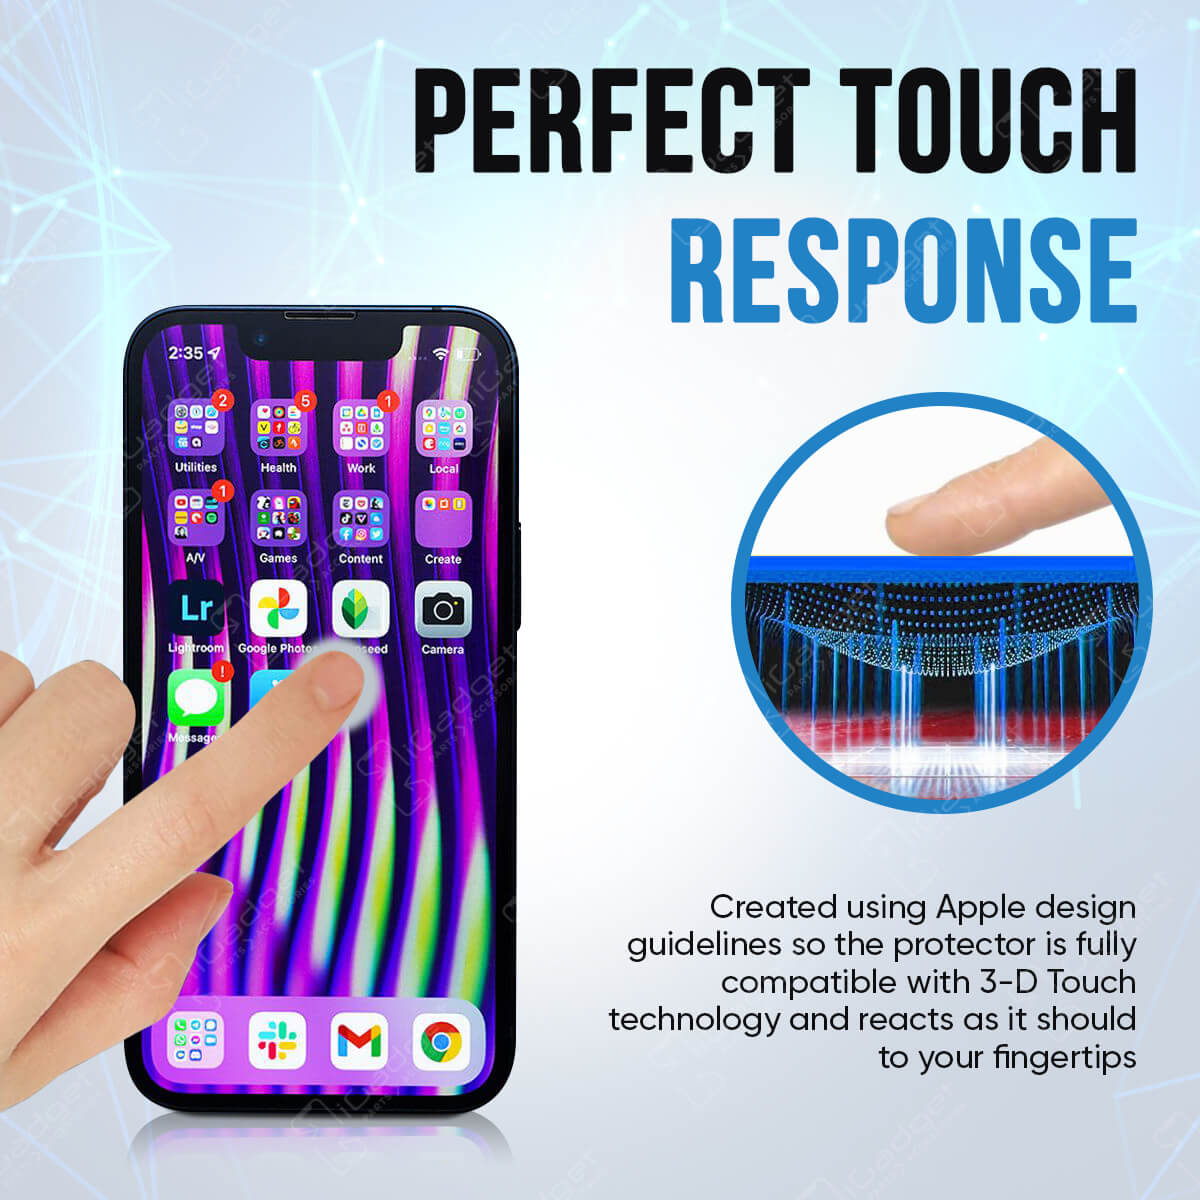 iPhone XR/iPhone 11 Glass Screen Protector Ultra Clear | Case Friendly